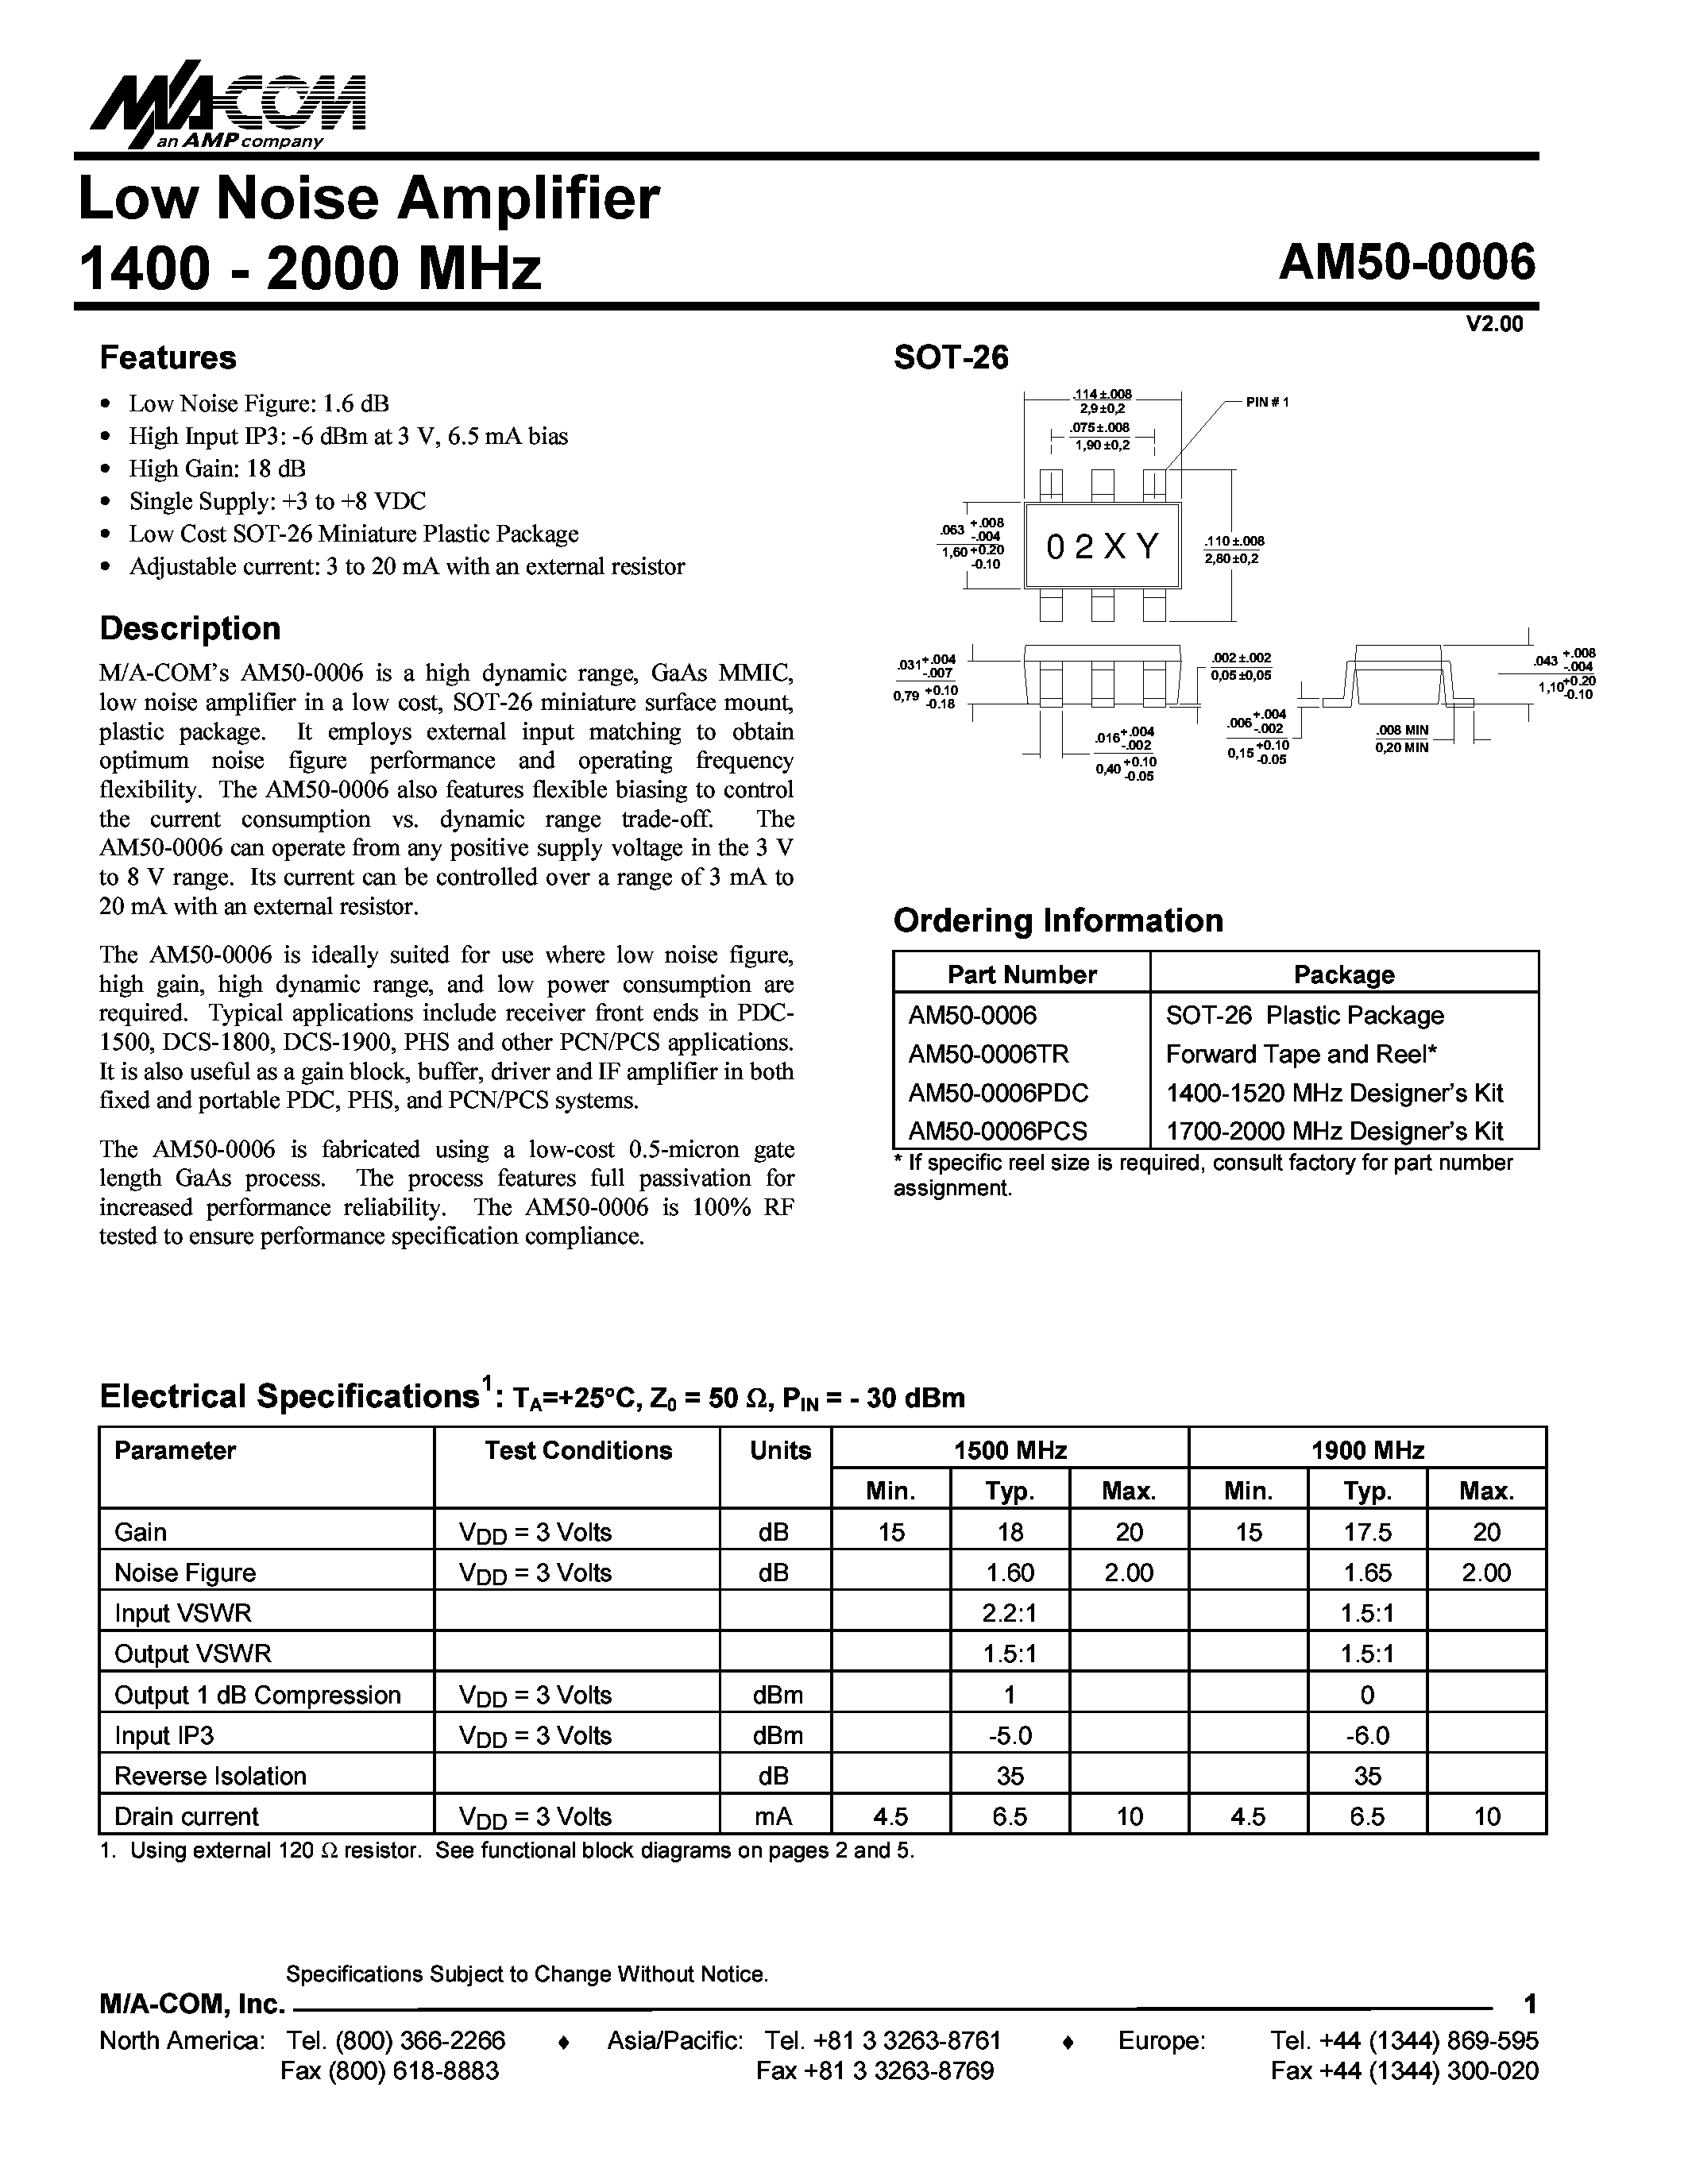 Datasheet AM50-0006TR - Low Noise Amplifier 1400 - 2000 MHz page 1